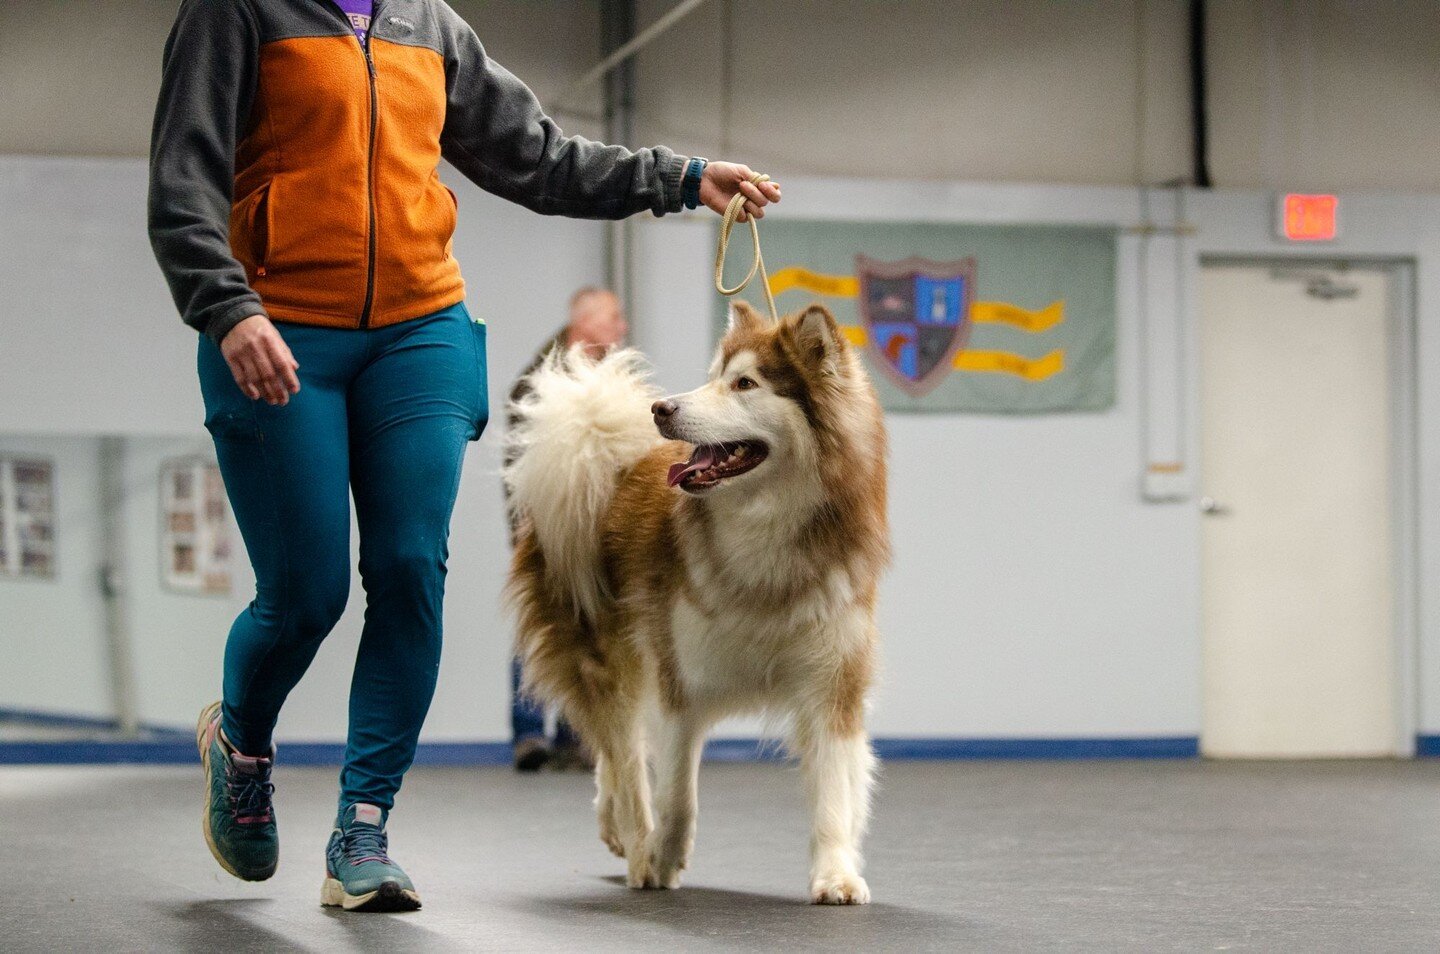 Conformation (dog shows) is not just a beauty contest as many think. The dogs are being judged against their breed standard, and this includes coat, expression, temperament and most importantly movement. In which how they are put together, or their c